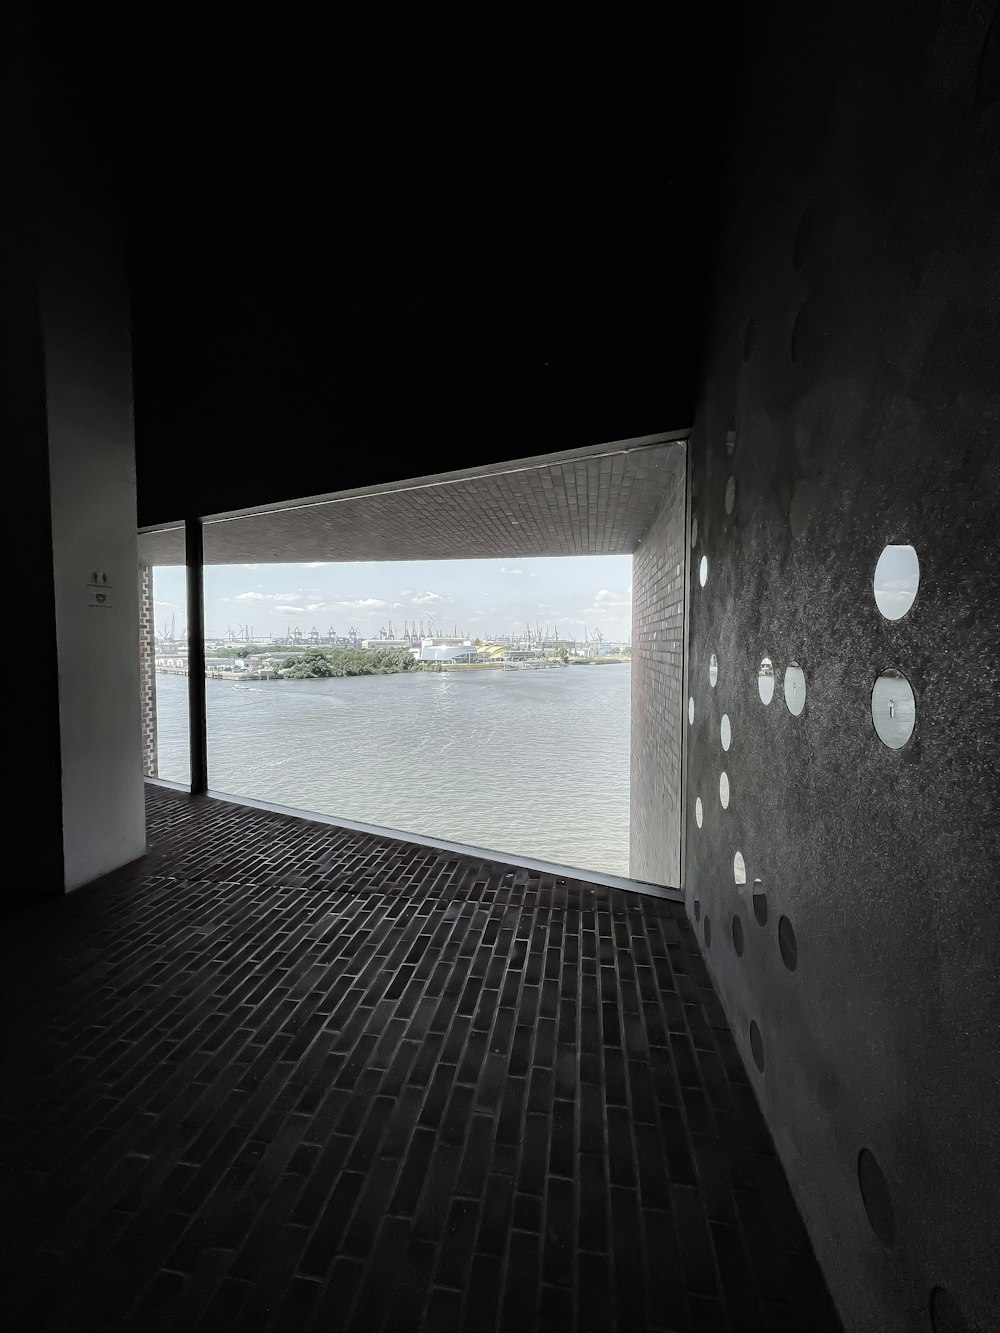 black and white concrete building near body of water during daytime